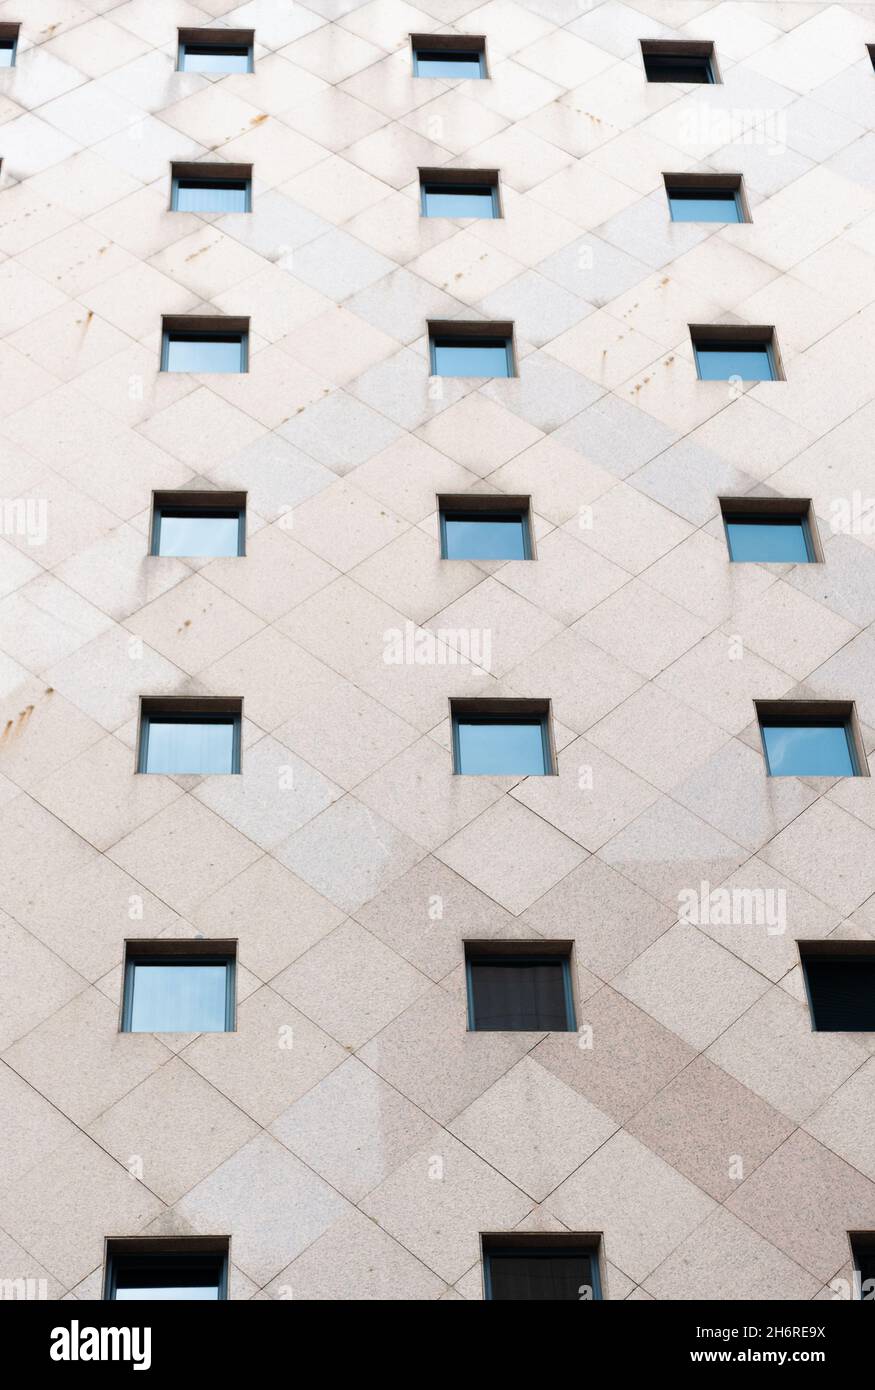 Part of the facade of a building with 12 windows in its concrete facade symmetrically placed in 4 rows and 3 columns, in the center of the city. Urban Stock Photo